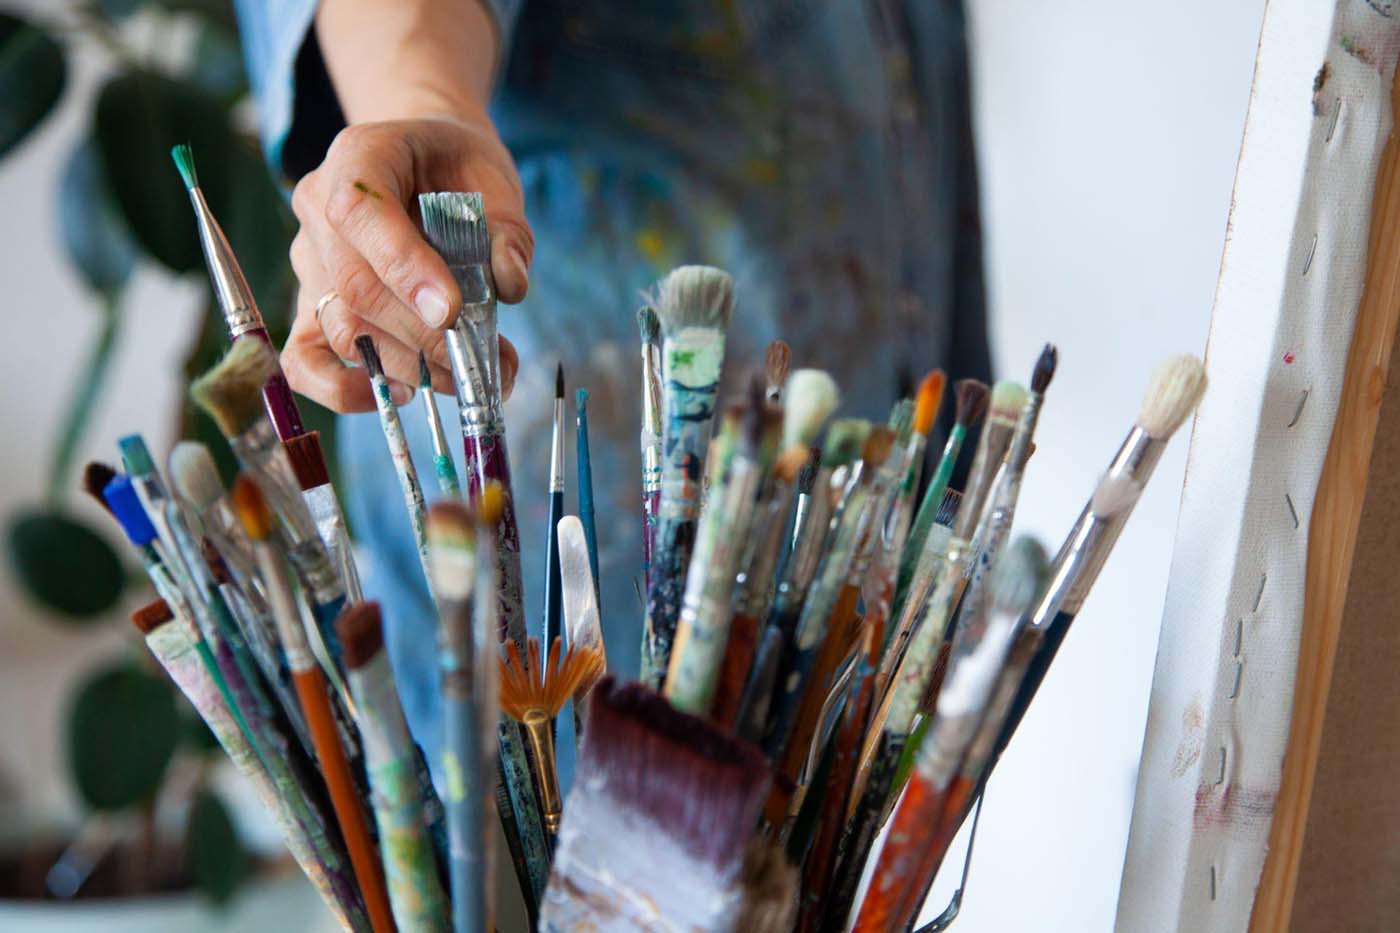 Storing Art Supplies in Self Storage Units: Transform Your Self-Storage Unit into an Artist's Sanctuary